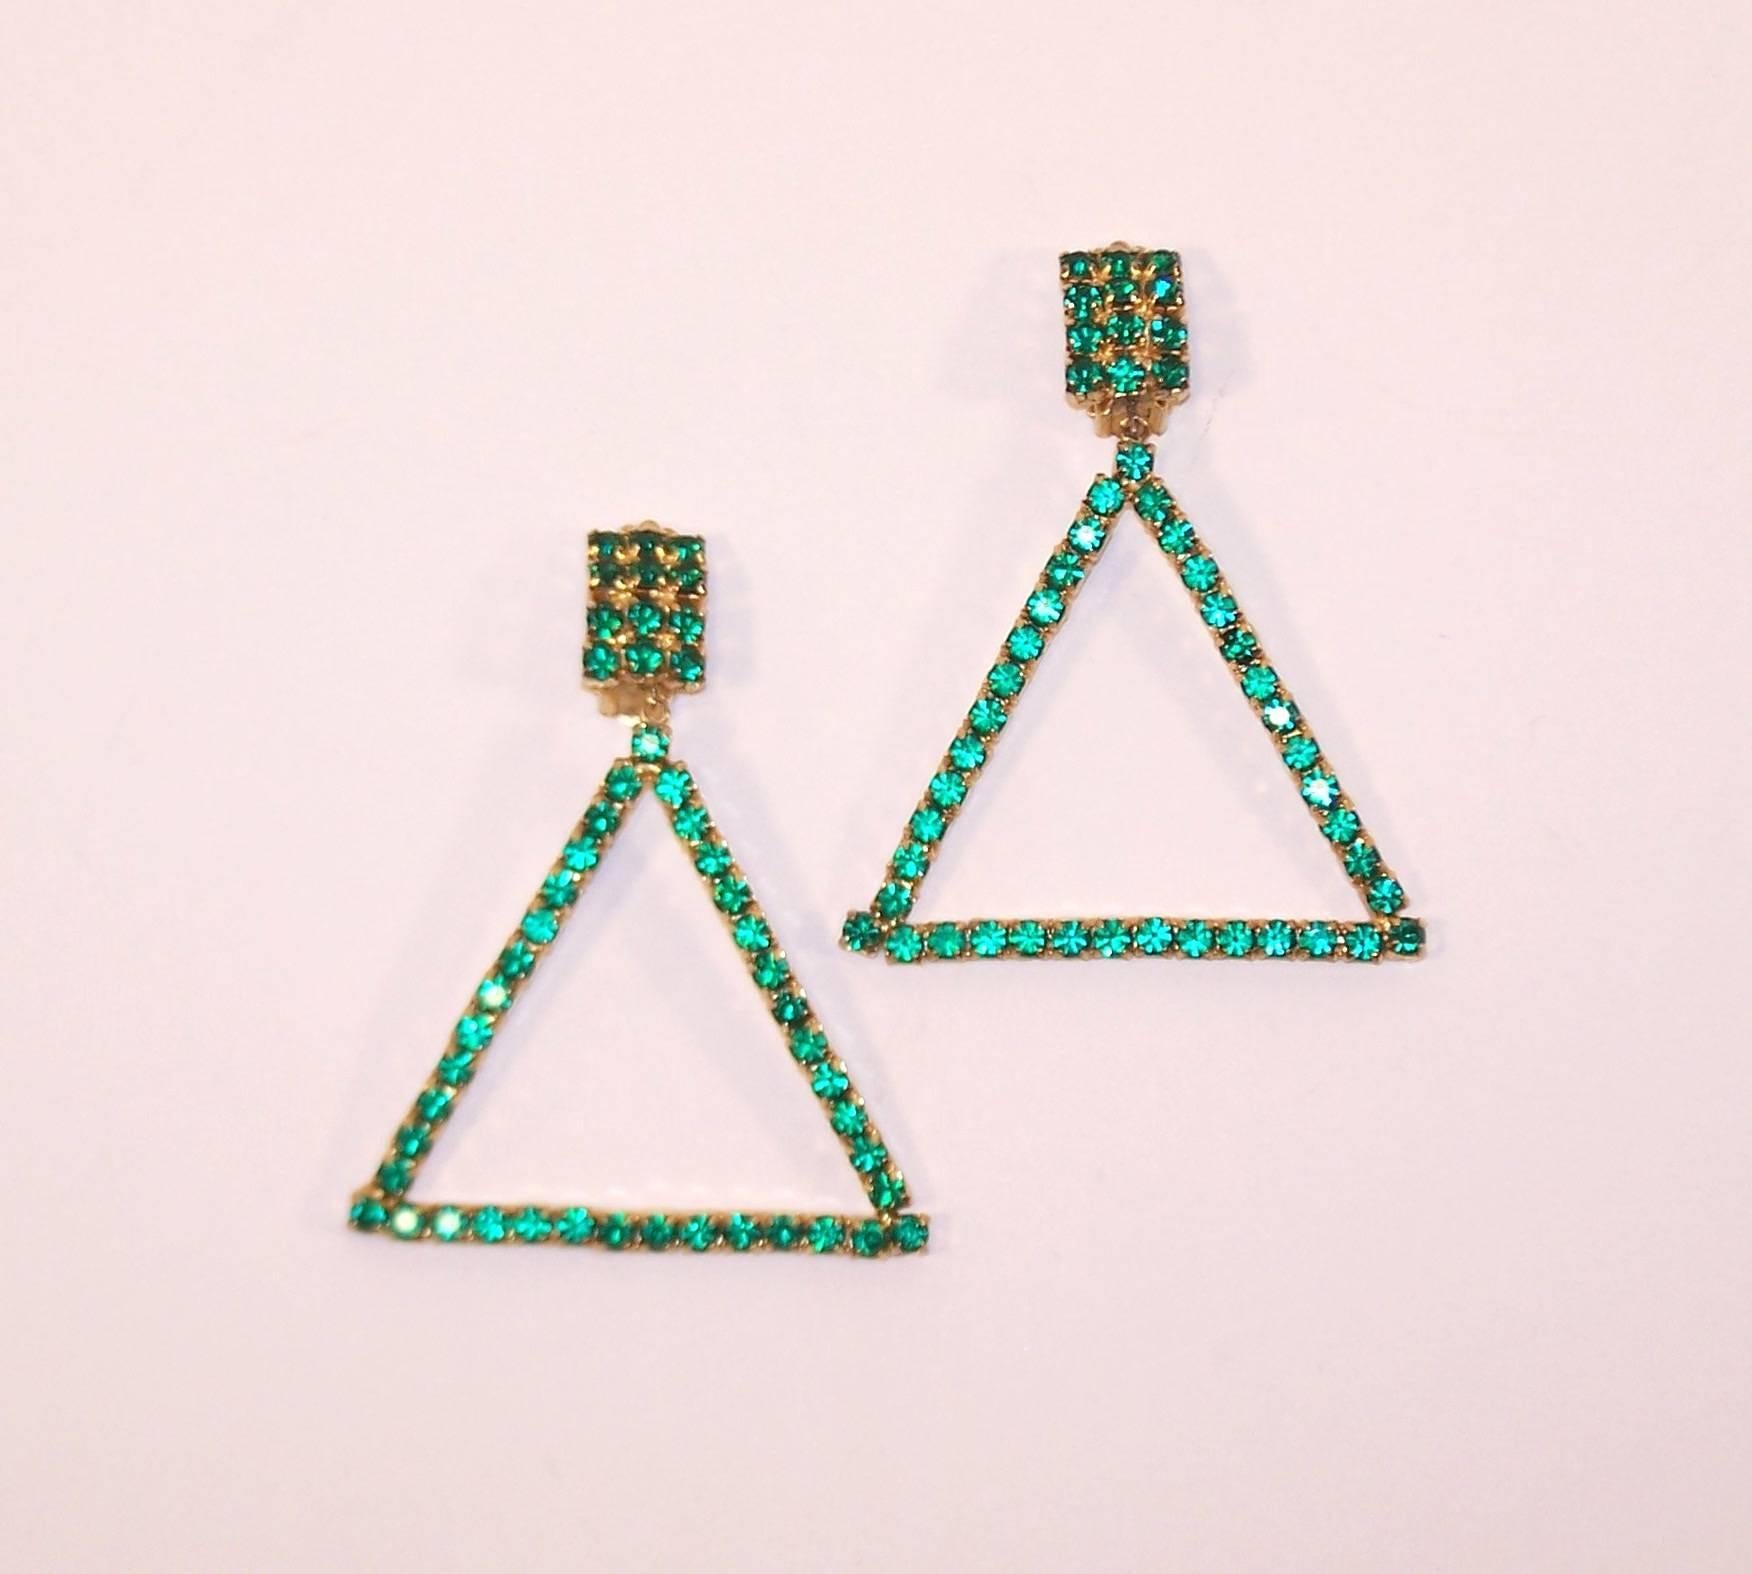 Combine a classic emerald green color and a 1960's mod triangular shape and you have a period perfect accessory for a modern ensemble.  These clip ons are light weight enough for all evening comfort and have just the right amount of movement to